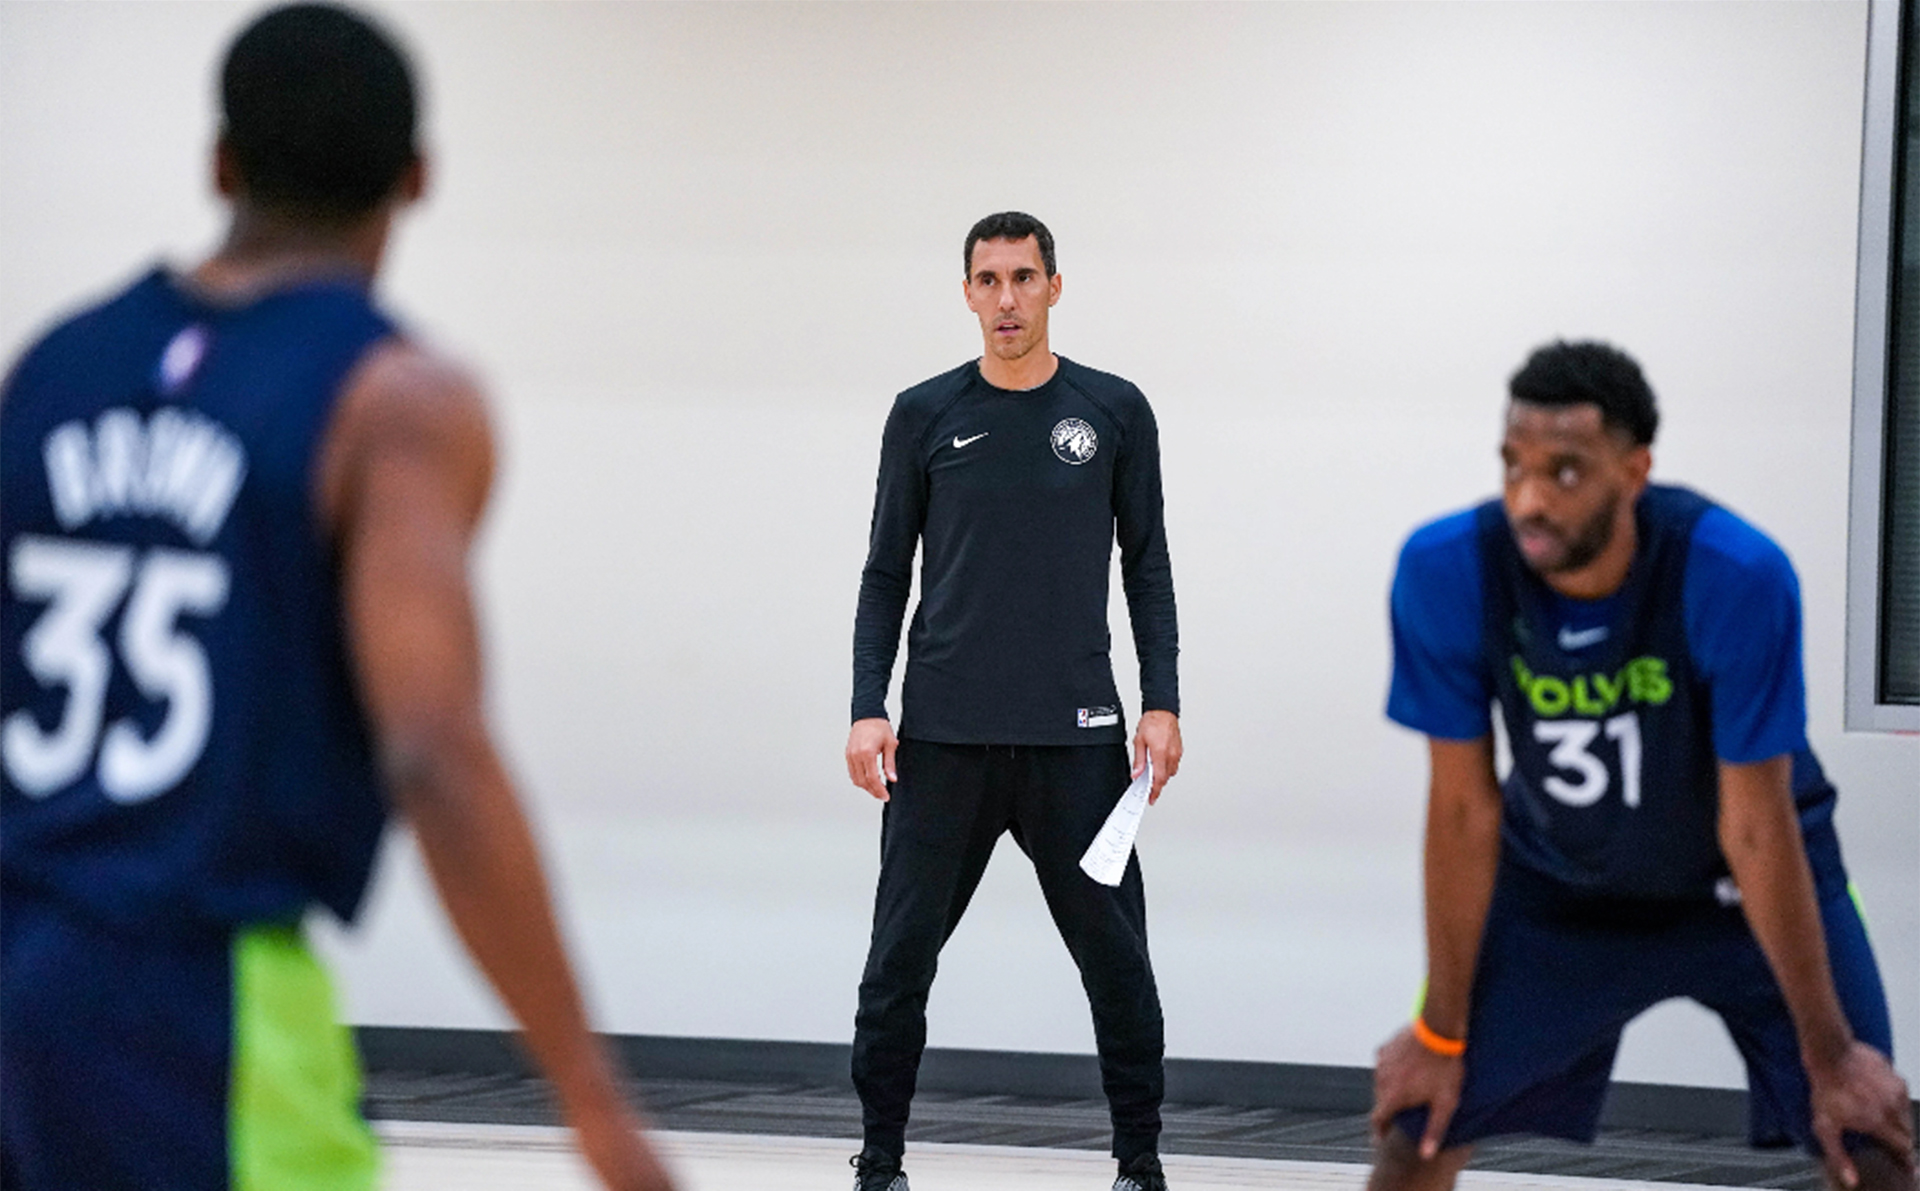 Pablo Prigioni will have his debut as a coach with the Argentine team in Brazil (Cody Sharrett / Timberwolves)